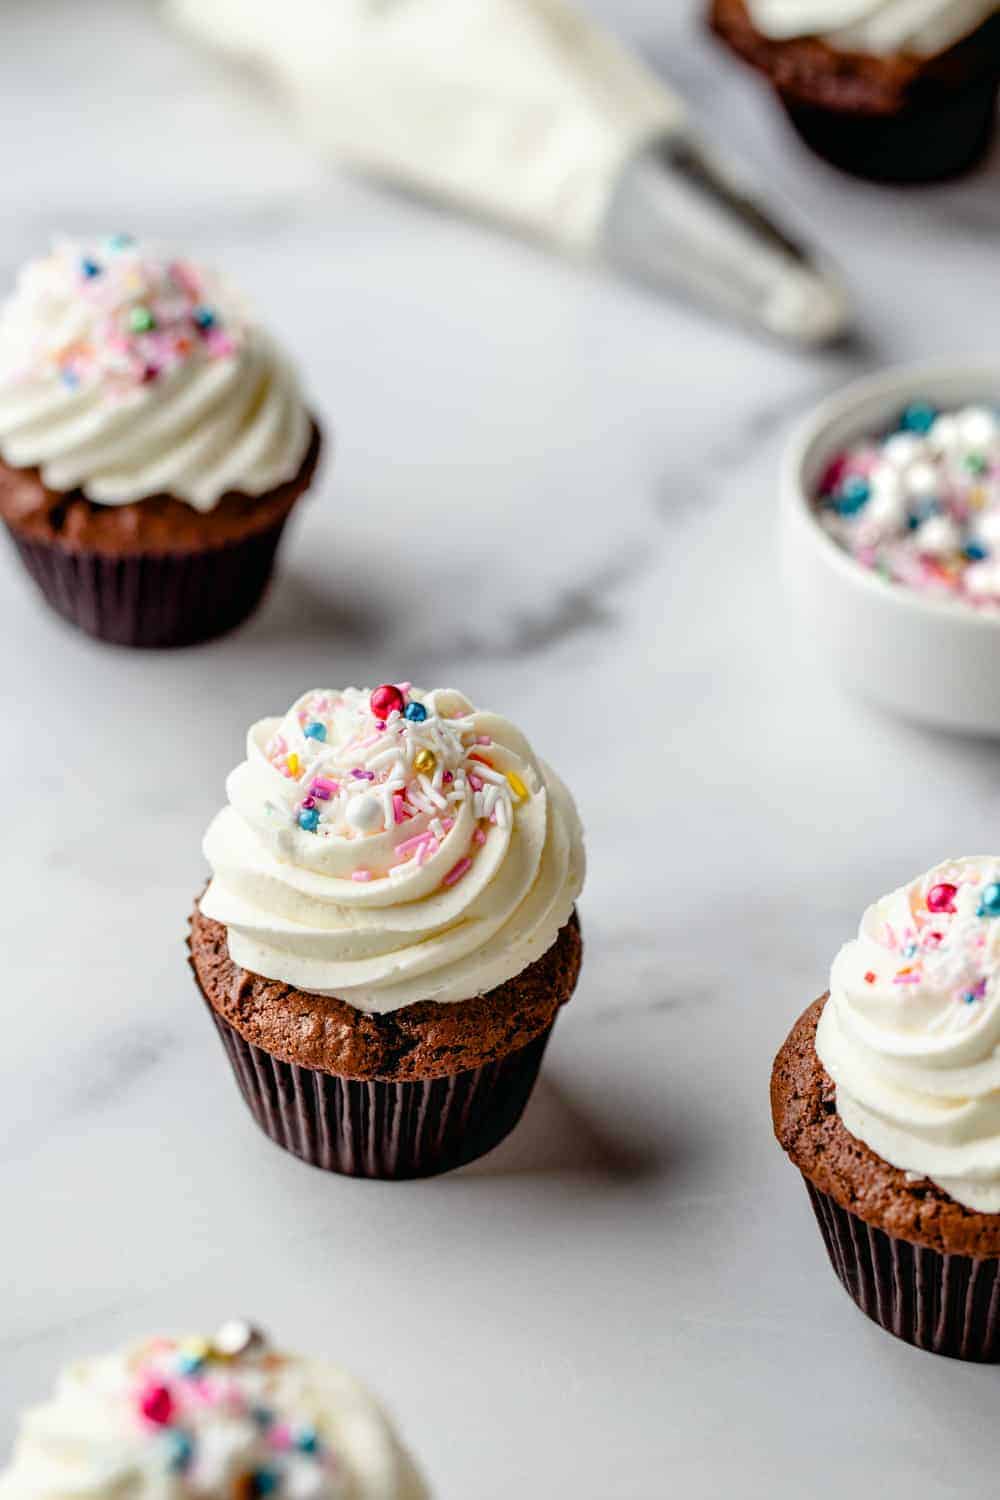 Cupcake with homemade buttercream frosting and multicolored sprinkles